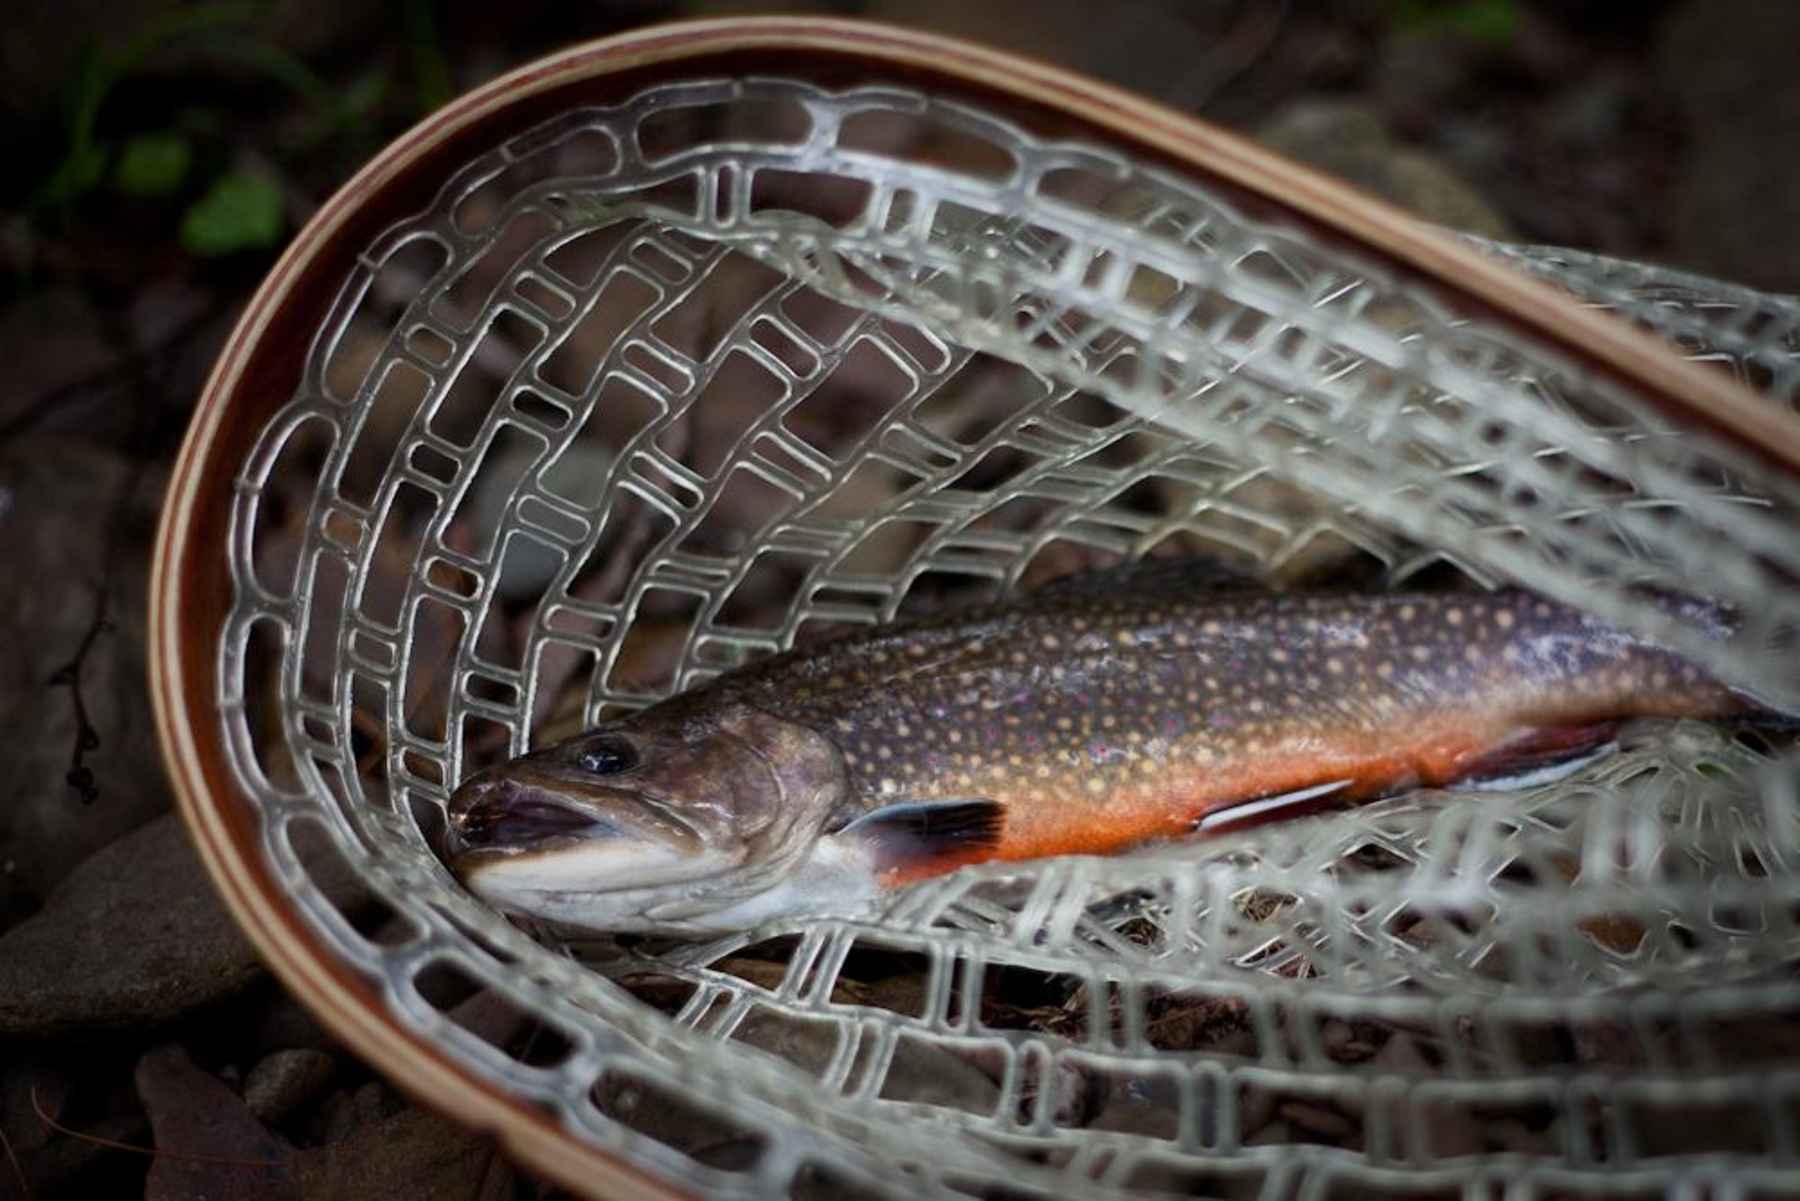 Trout and water temperature: How hot is too hot?